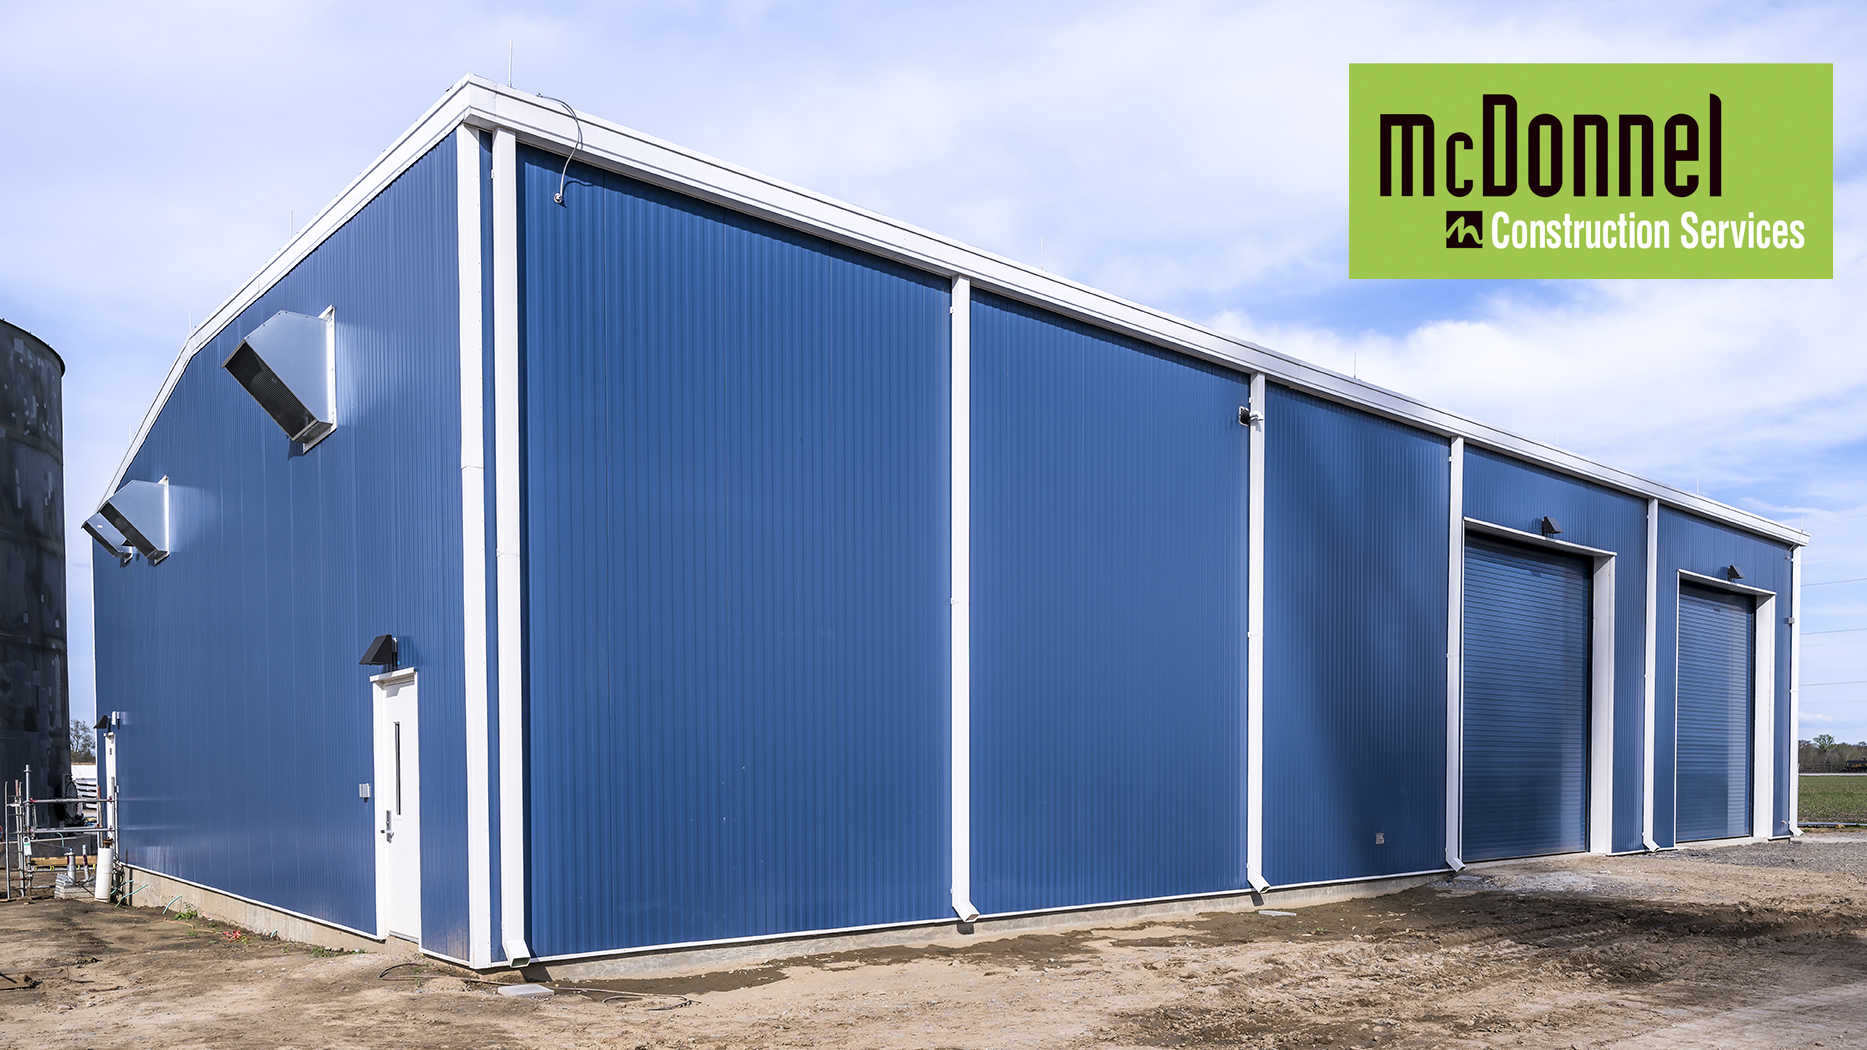 Pre-engineered metal building constructed by The McDonnel Group